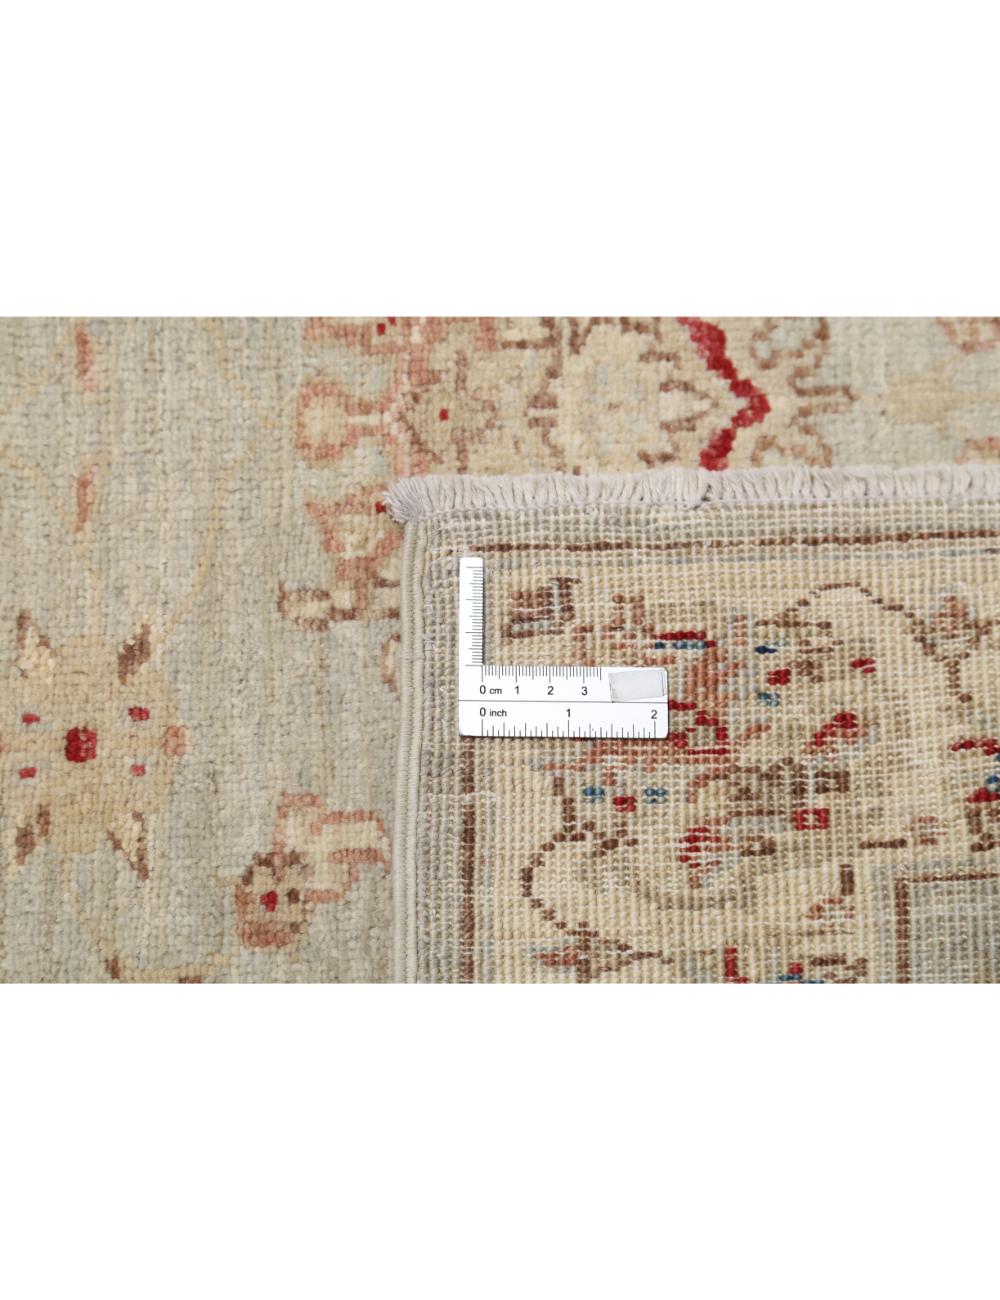 Ziegler 3' 0" X 4' 3" Hand-Knotted Wool Rug 3' 0" X 4' 3" (91 X 130) / Blue / Ivory